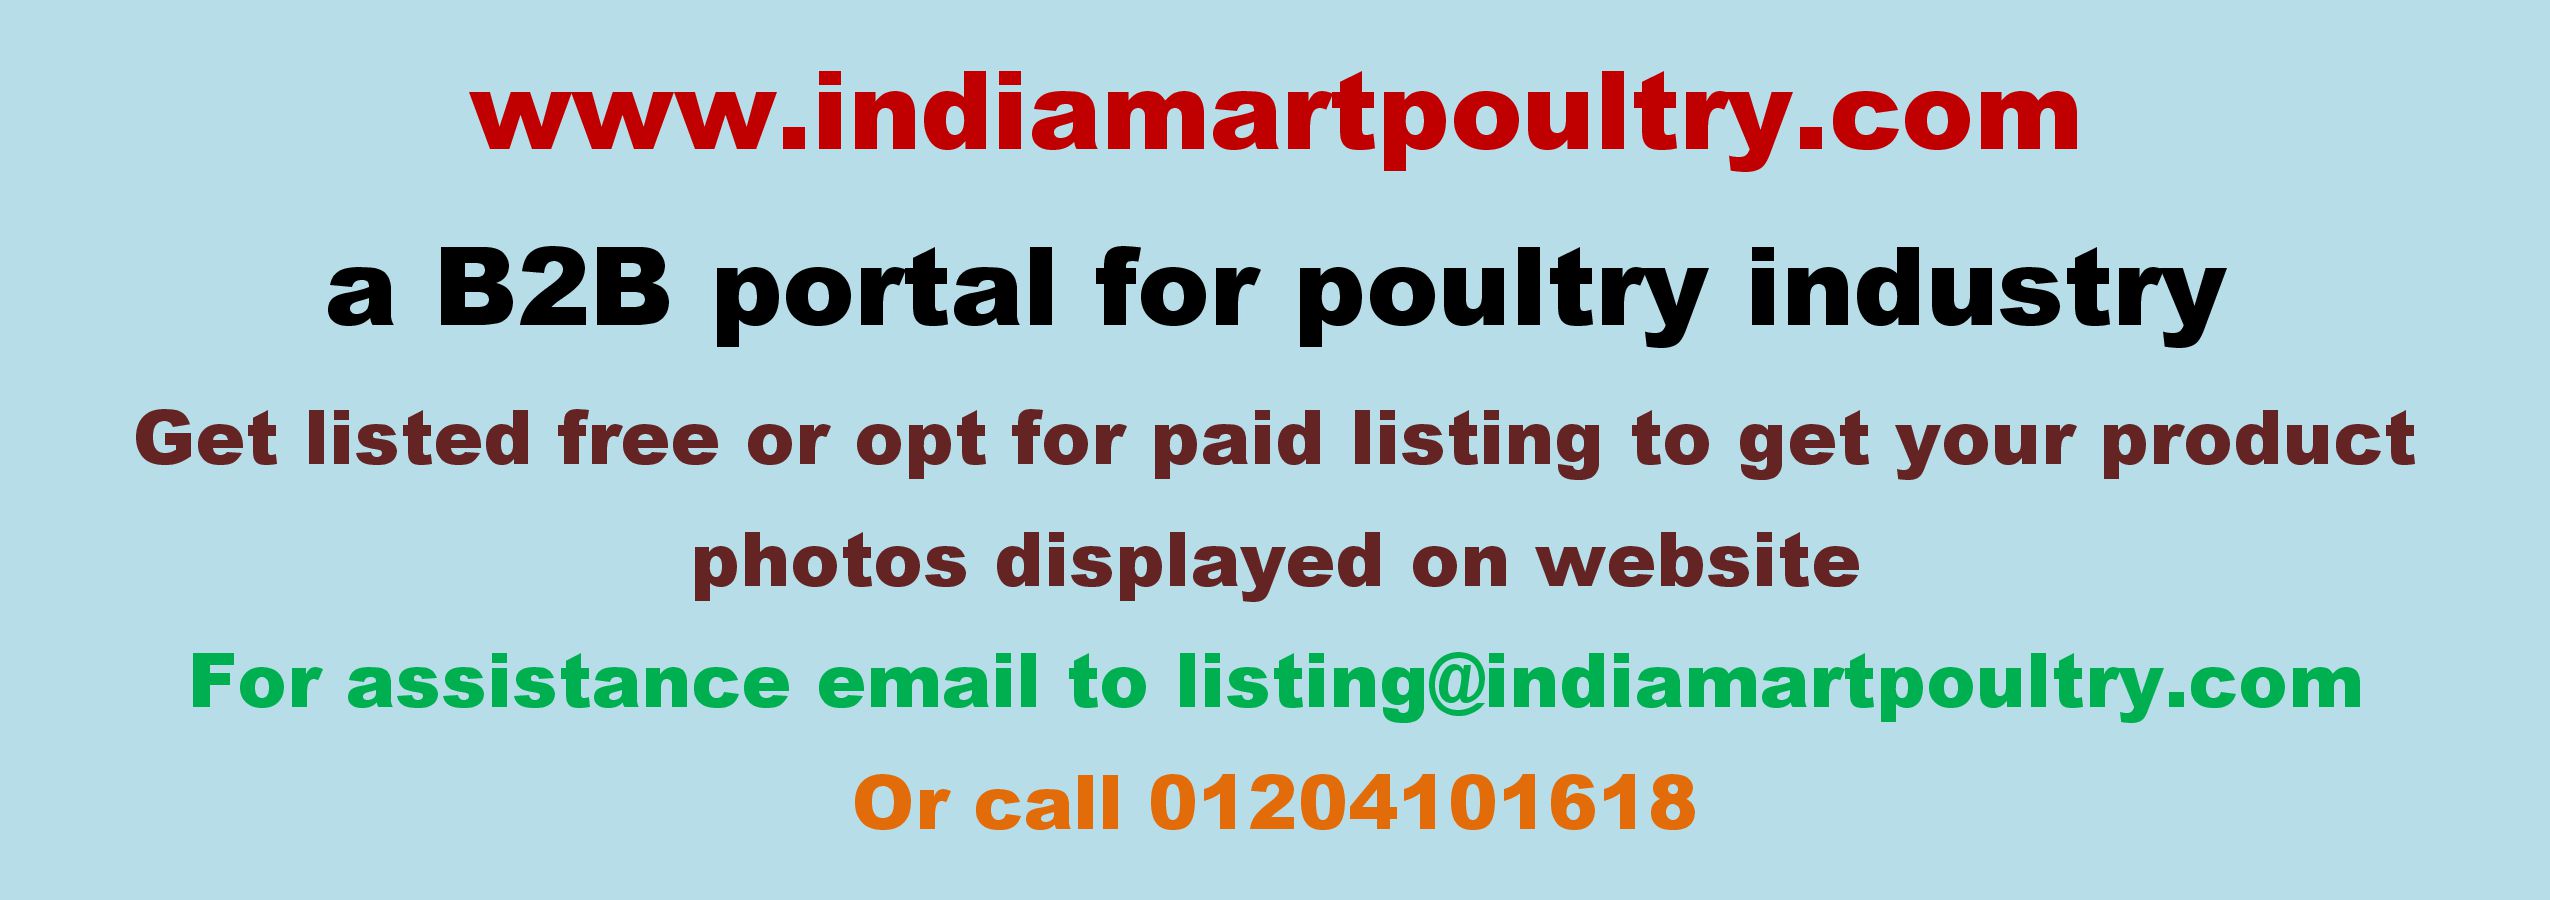 India Mart Poultry